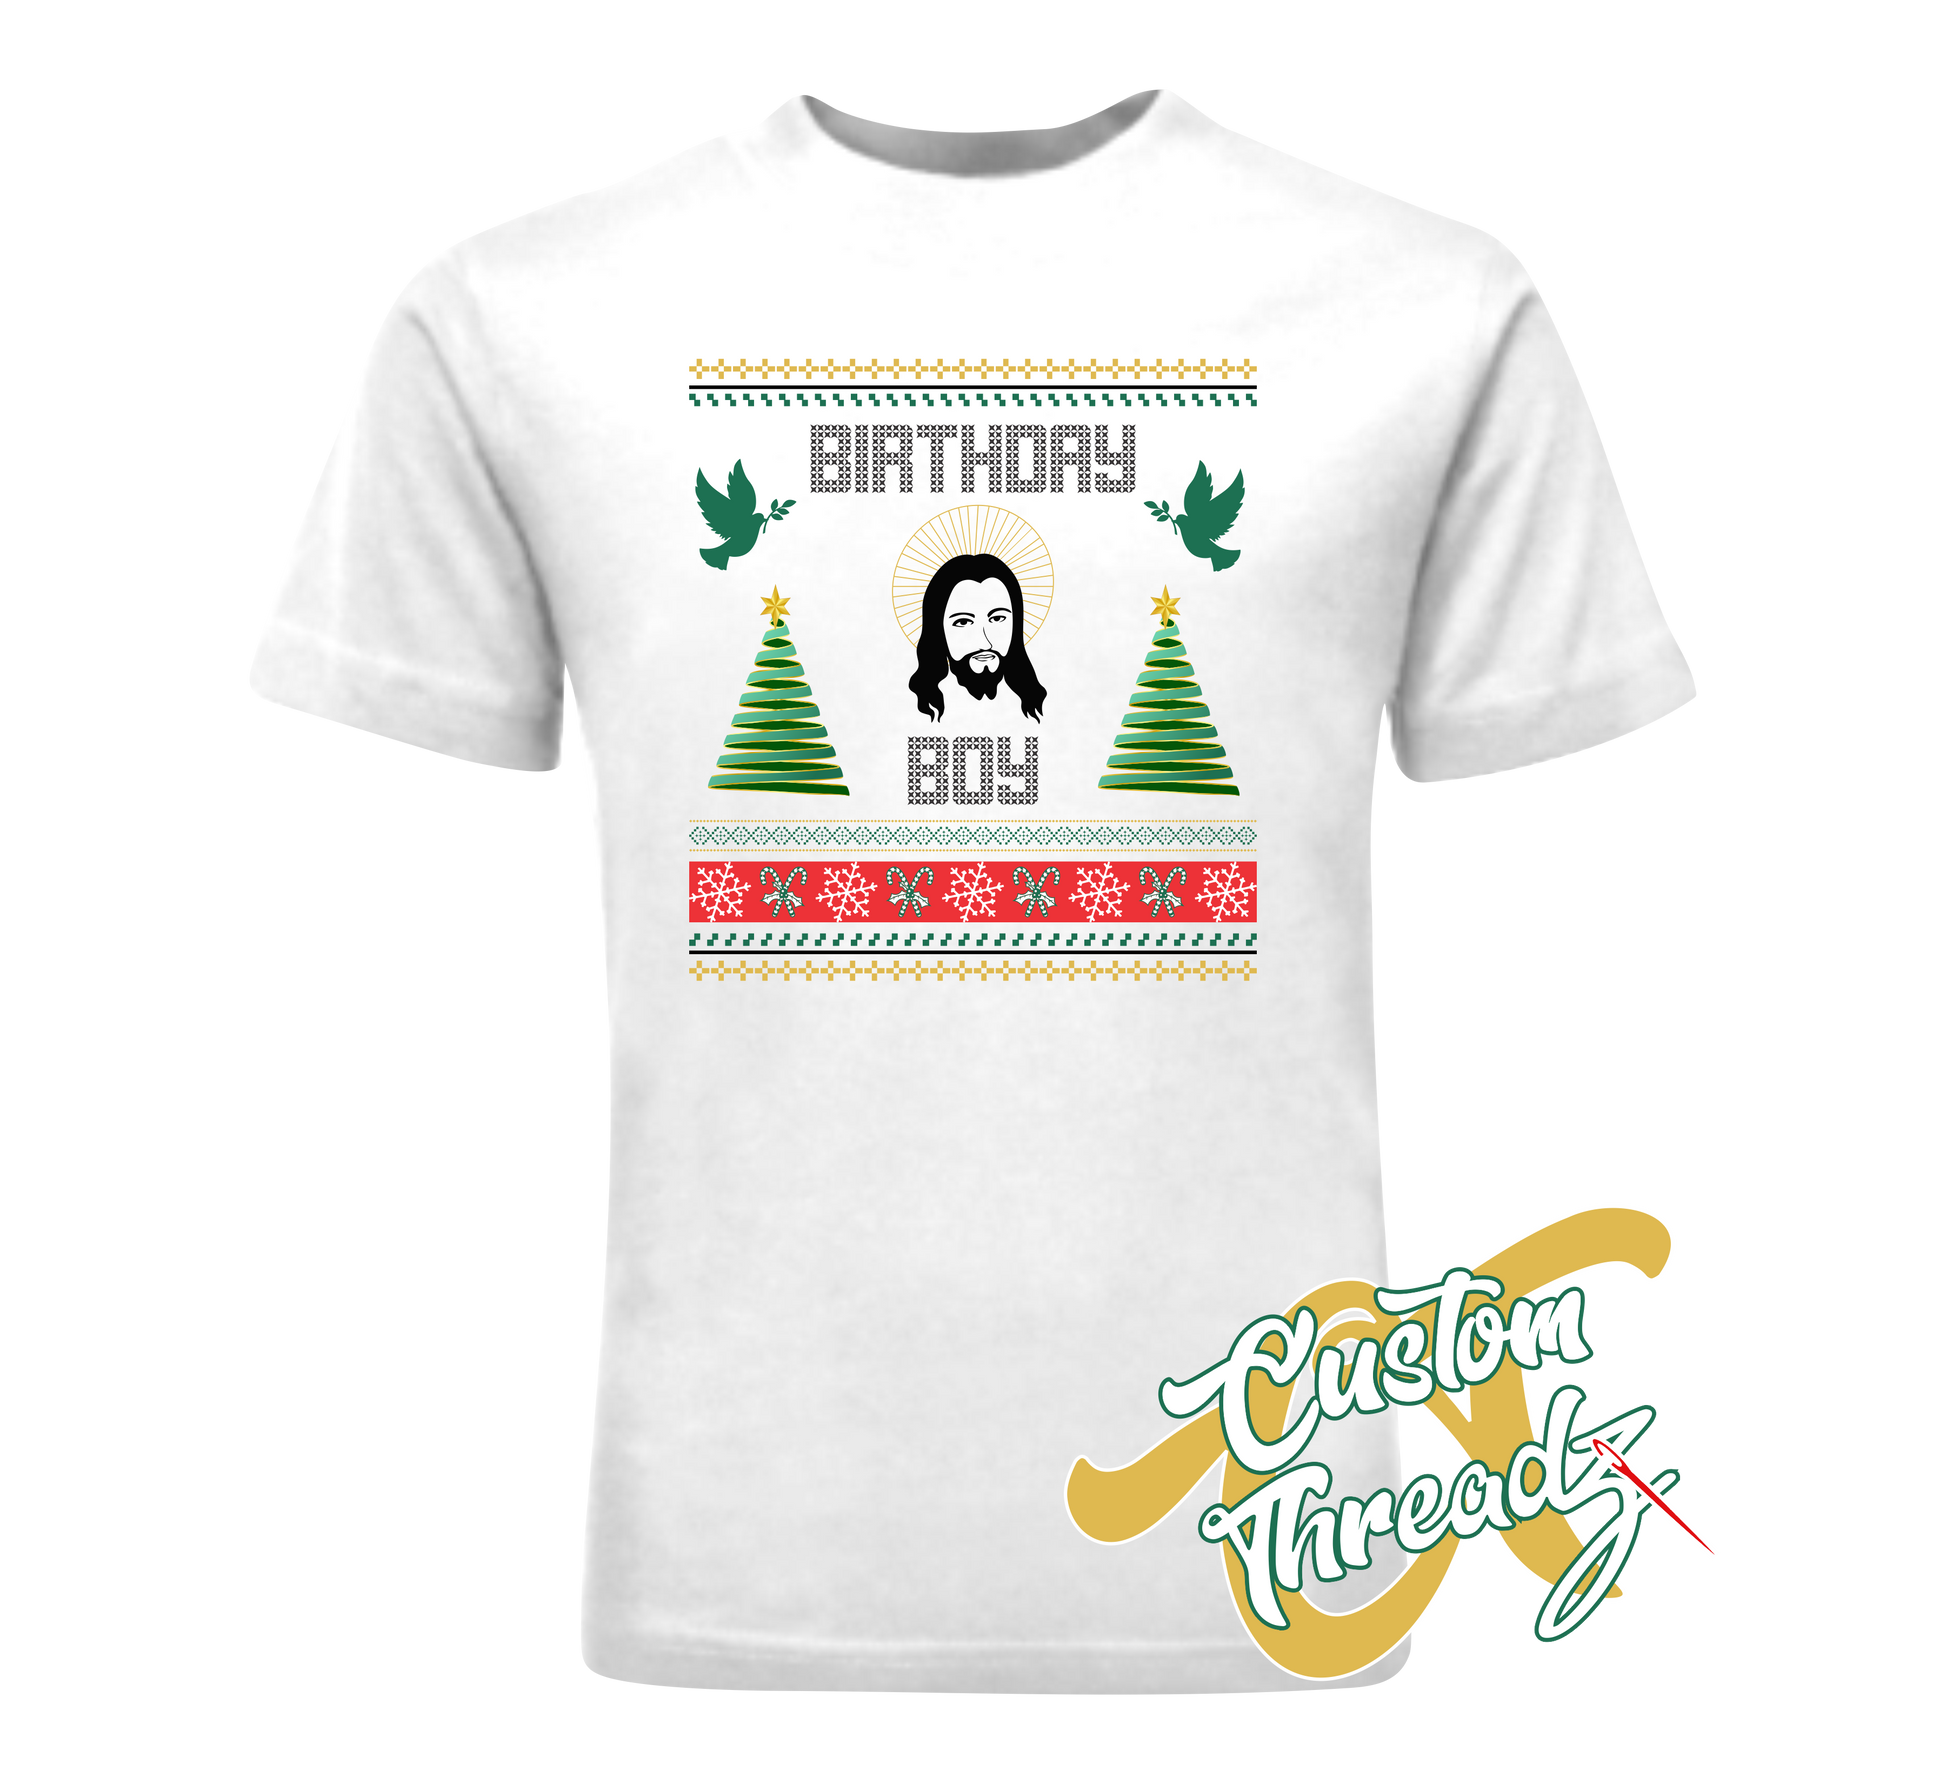 white tee with birthday boy christmas DTG printed design